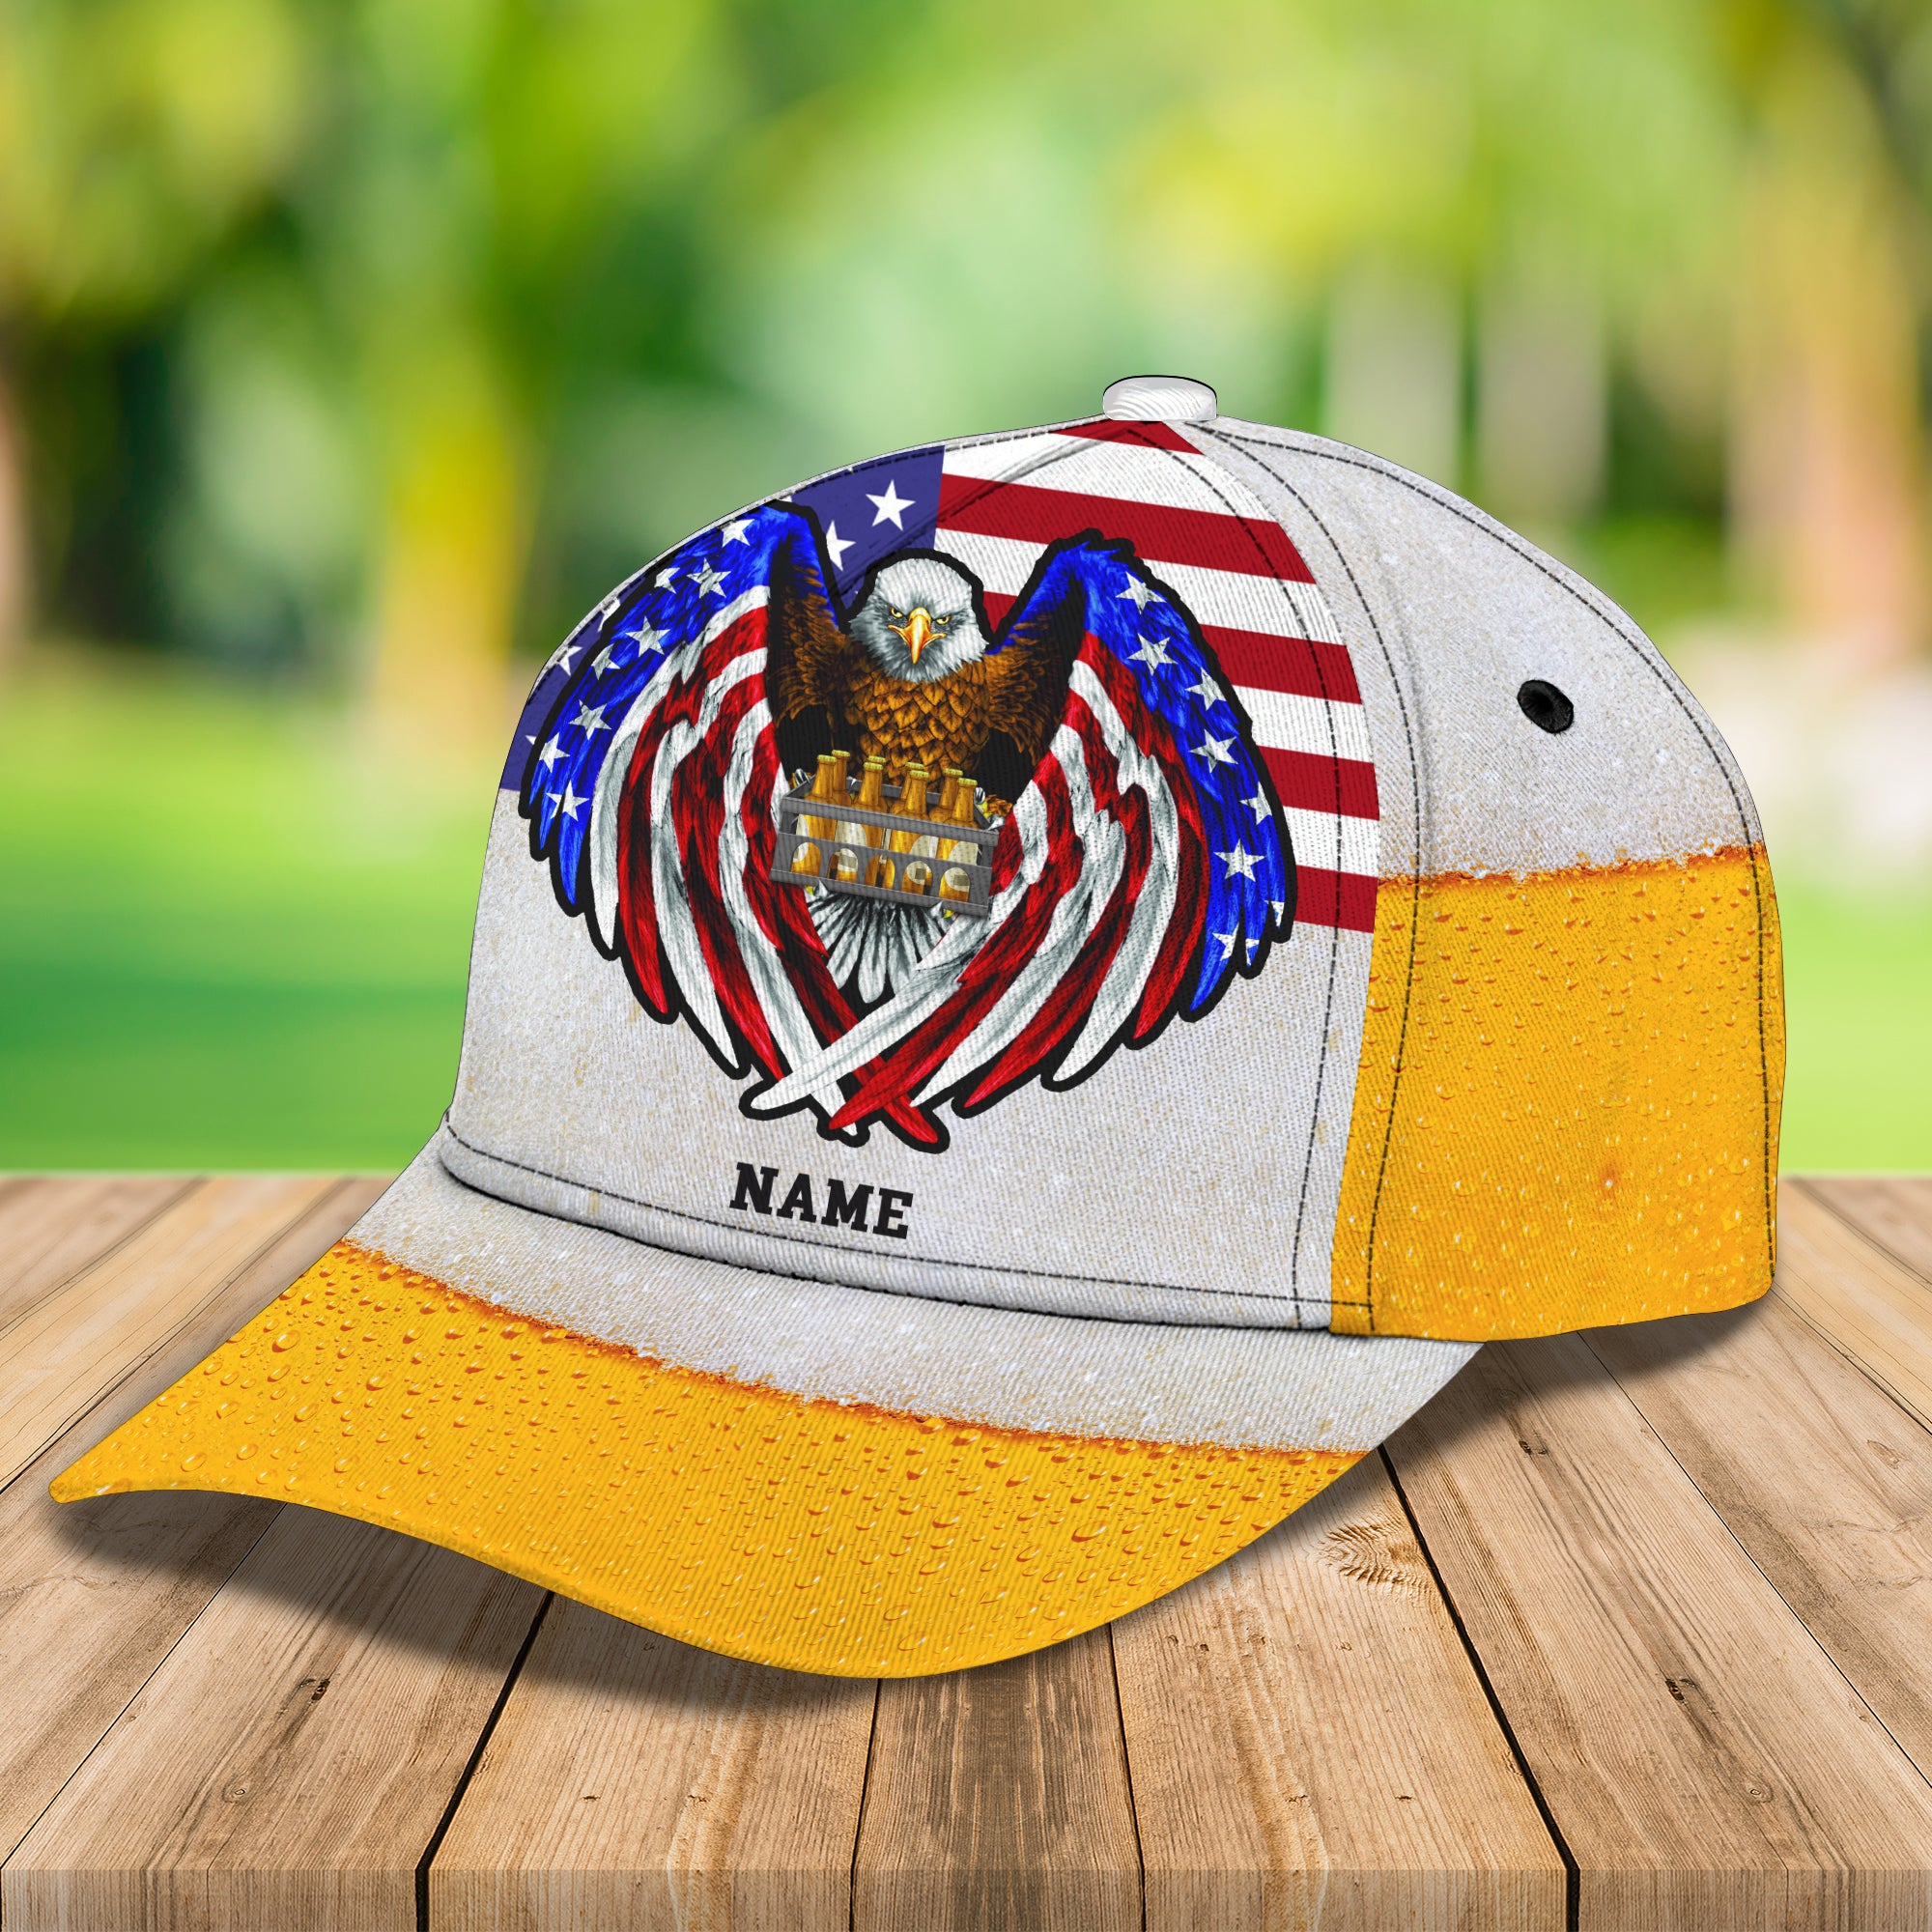 Beer and Eagle - Personalized Name Cap -Loop- Hd98 17